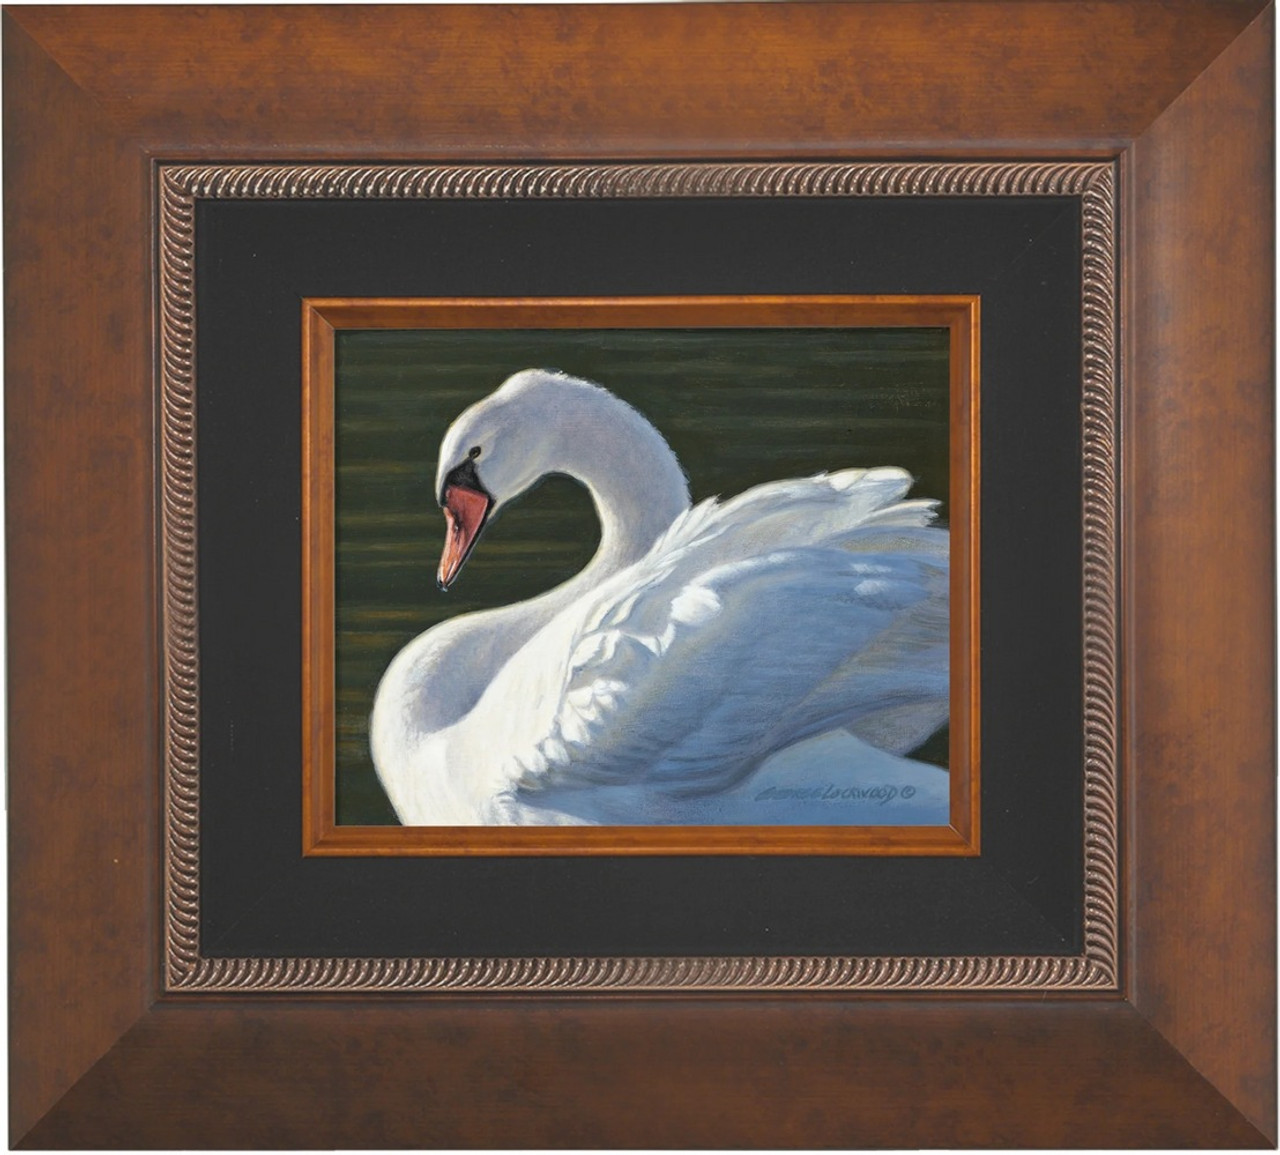 Aglow Framed Original Painting on Canvas by George Lockwood